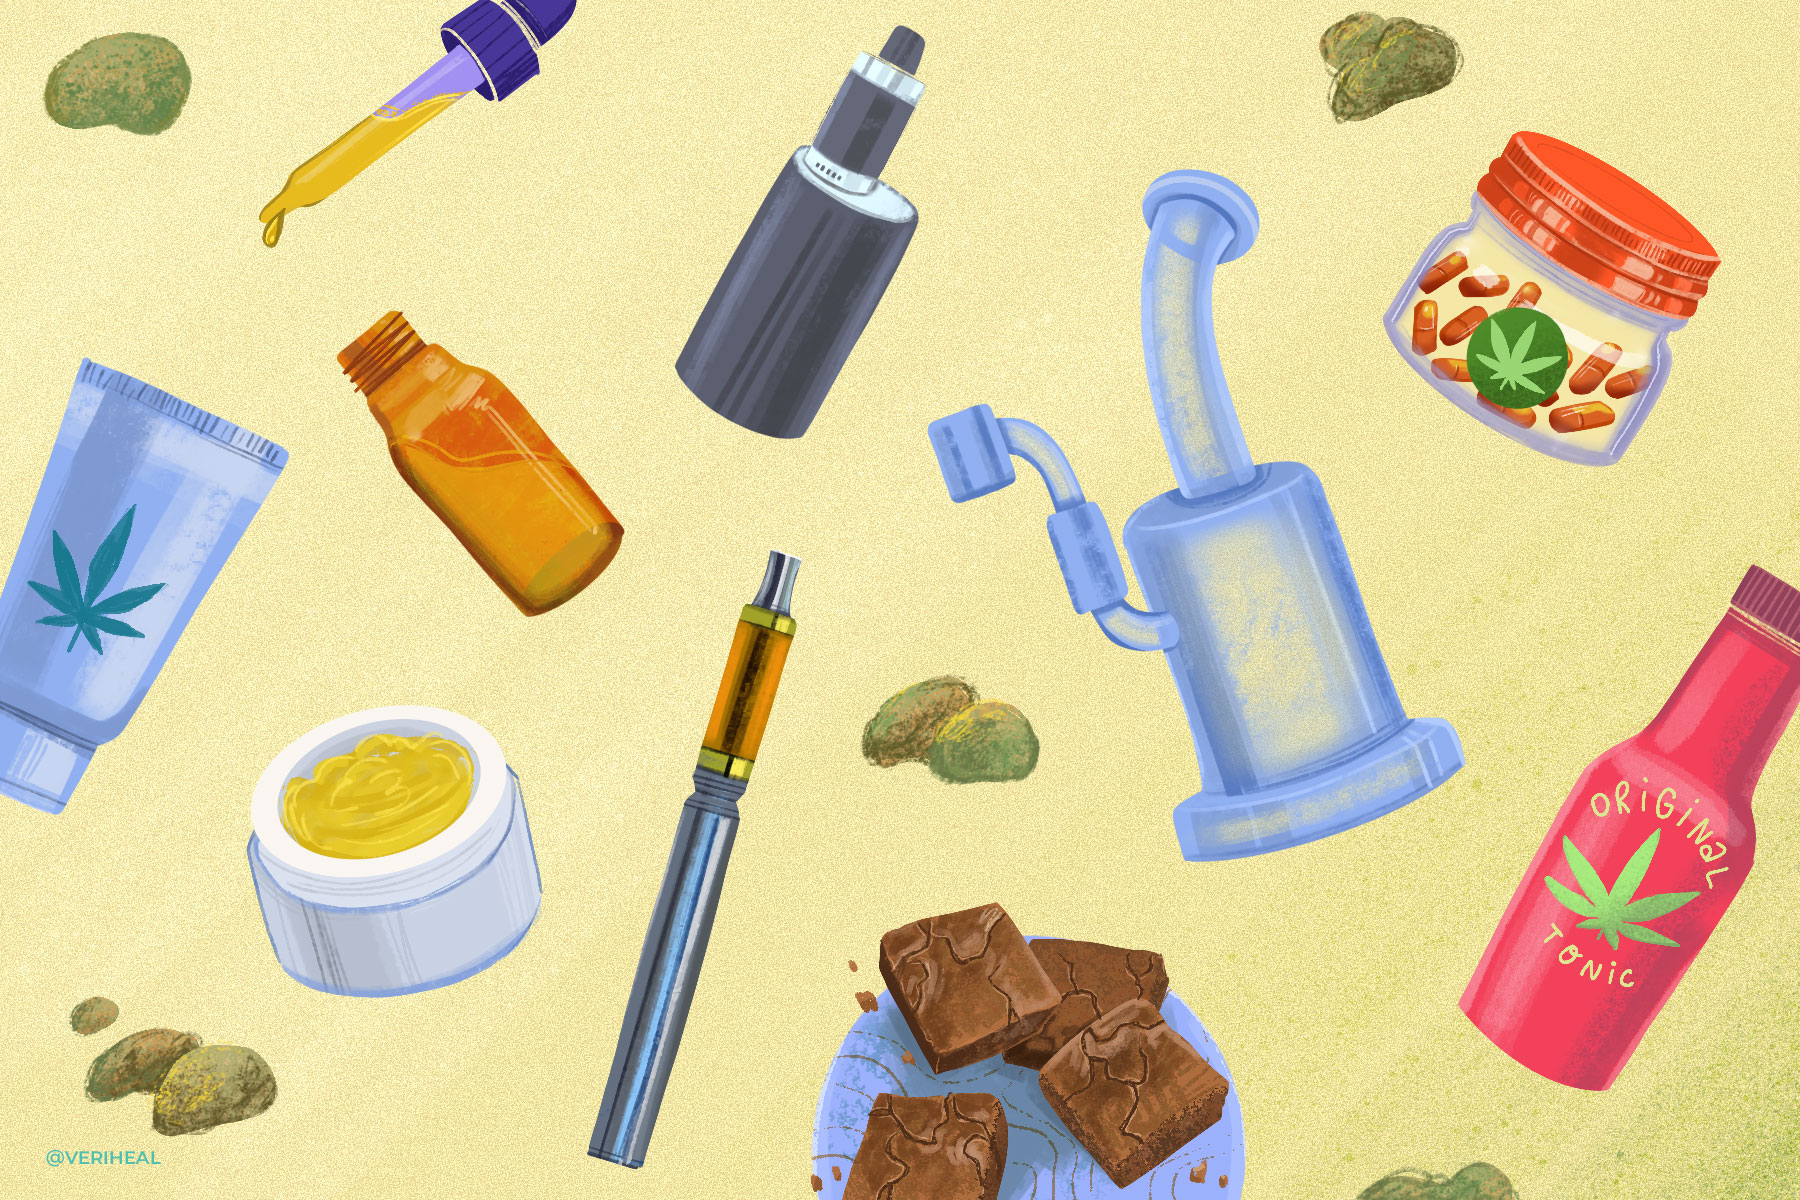 How to Get High Without Smoking: 8 Ways to Consume Cannabis